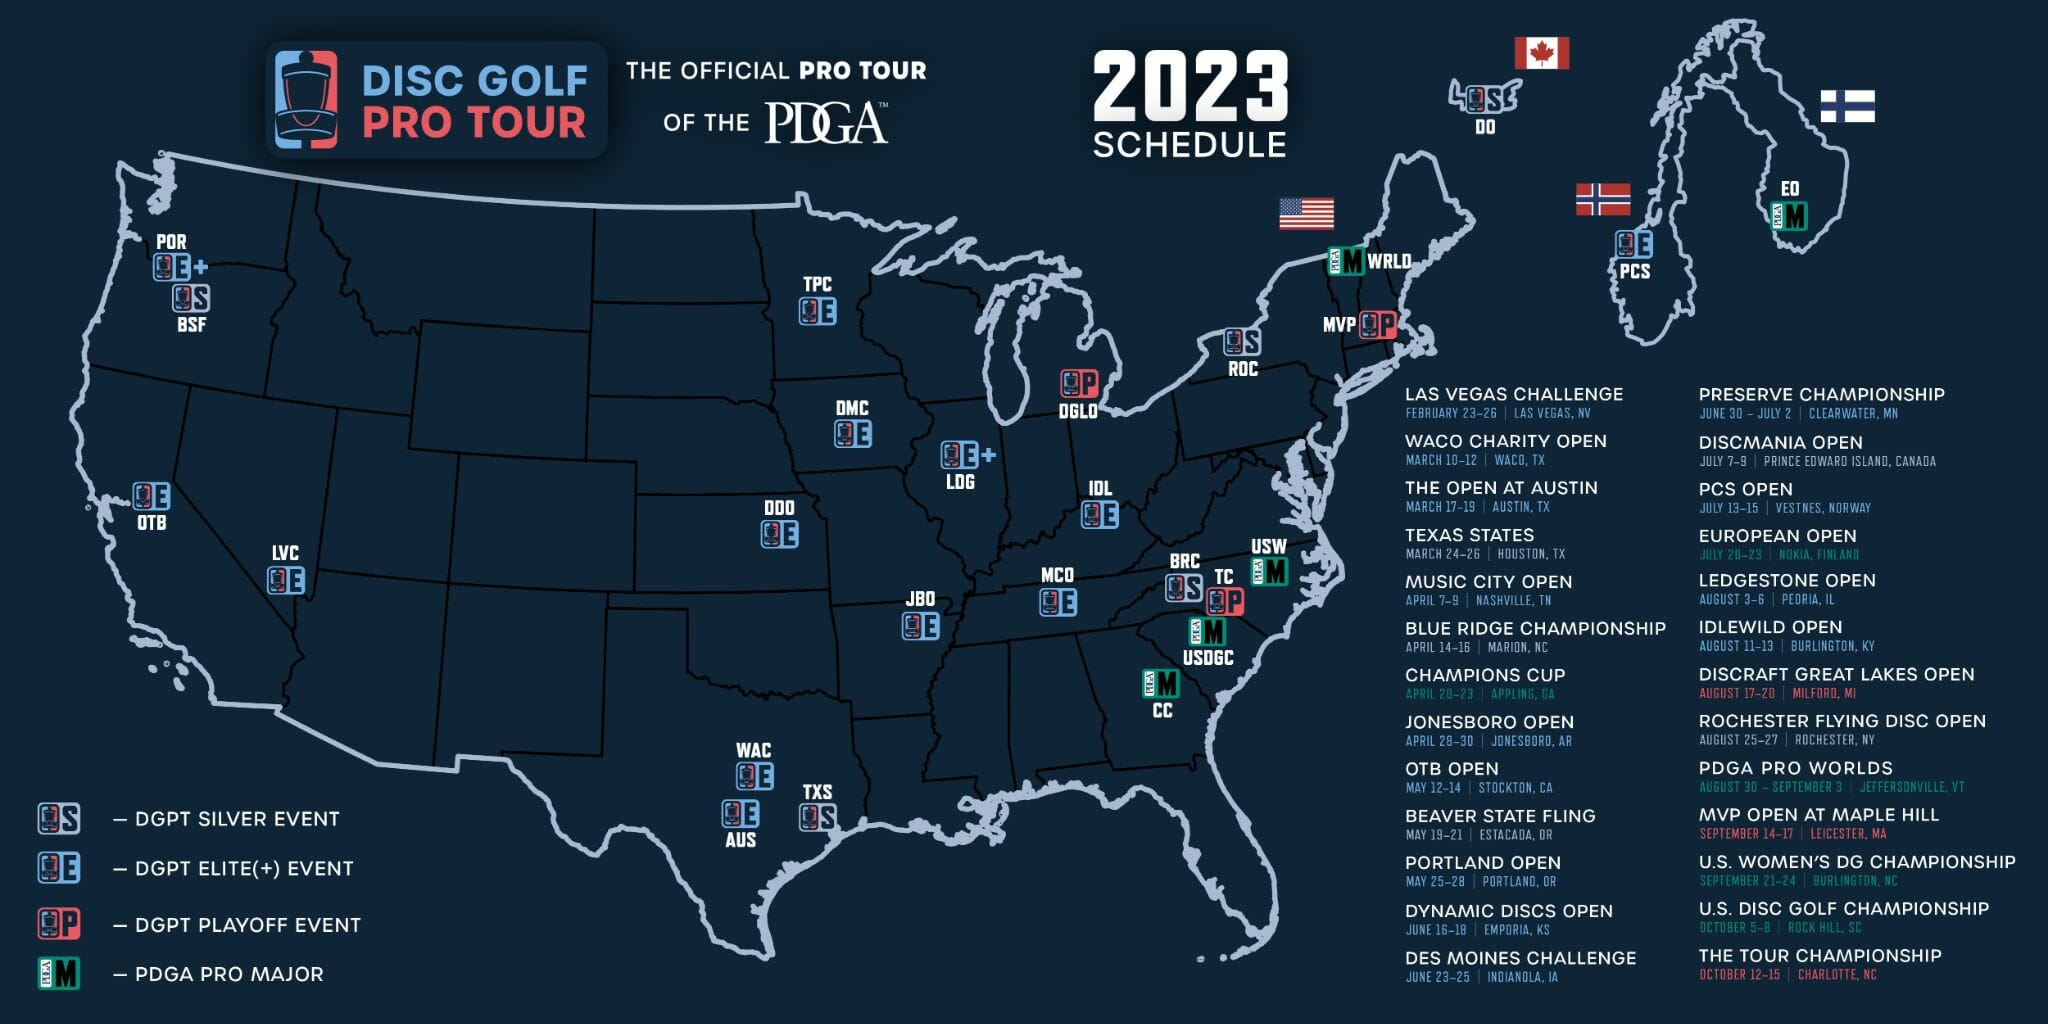 Here is the 2023 Disc Golf Pro Tour Schedule